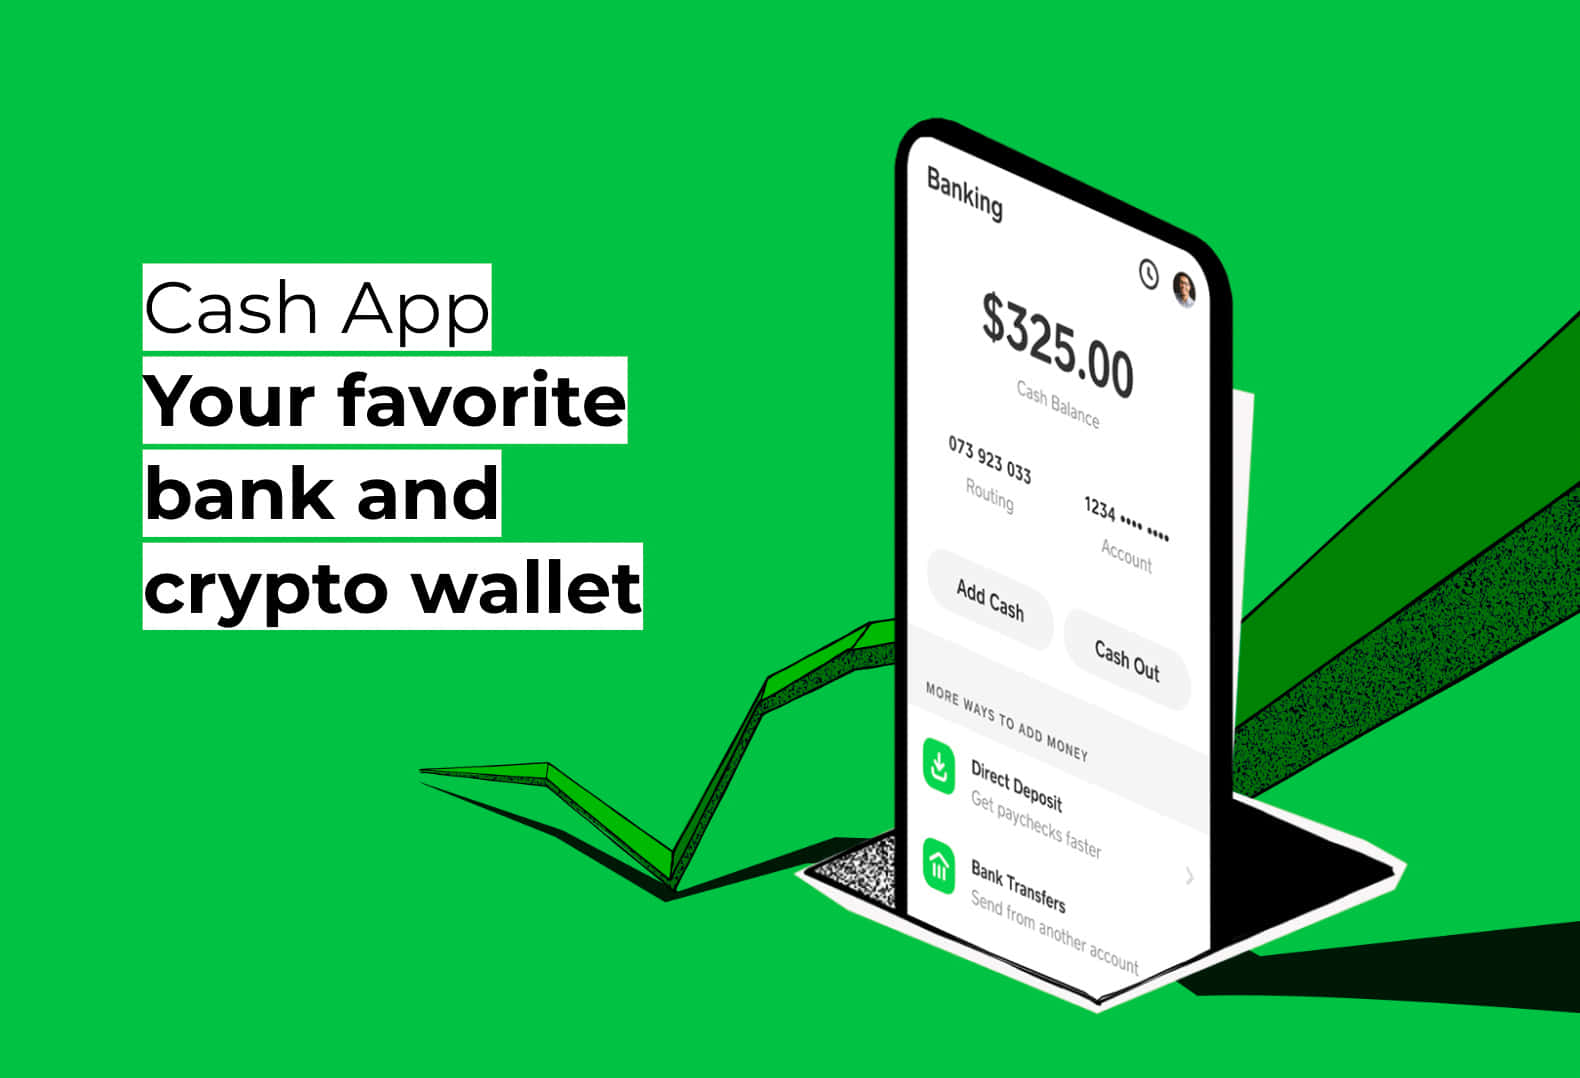 Get your Cash App balance with just one click